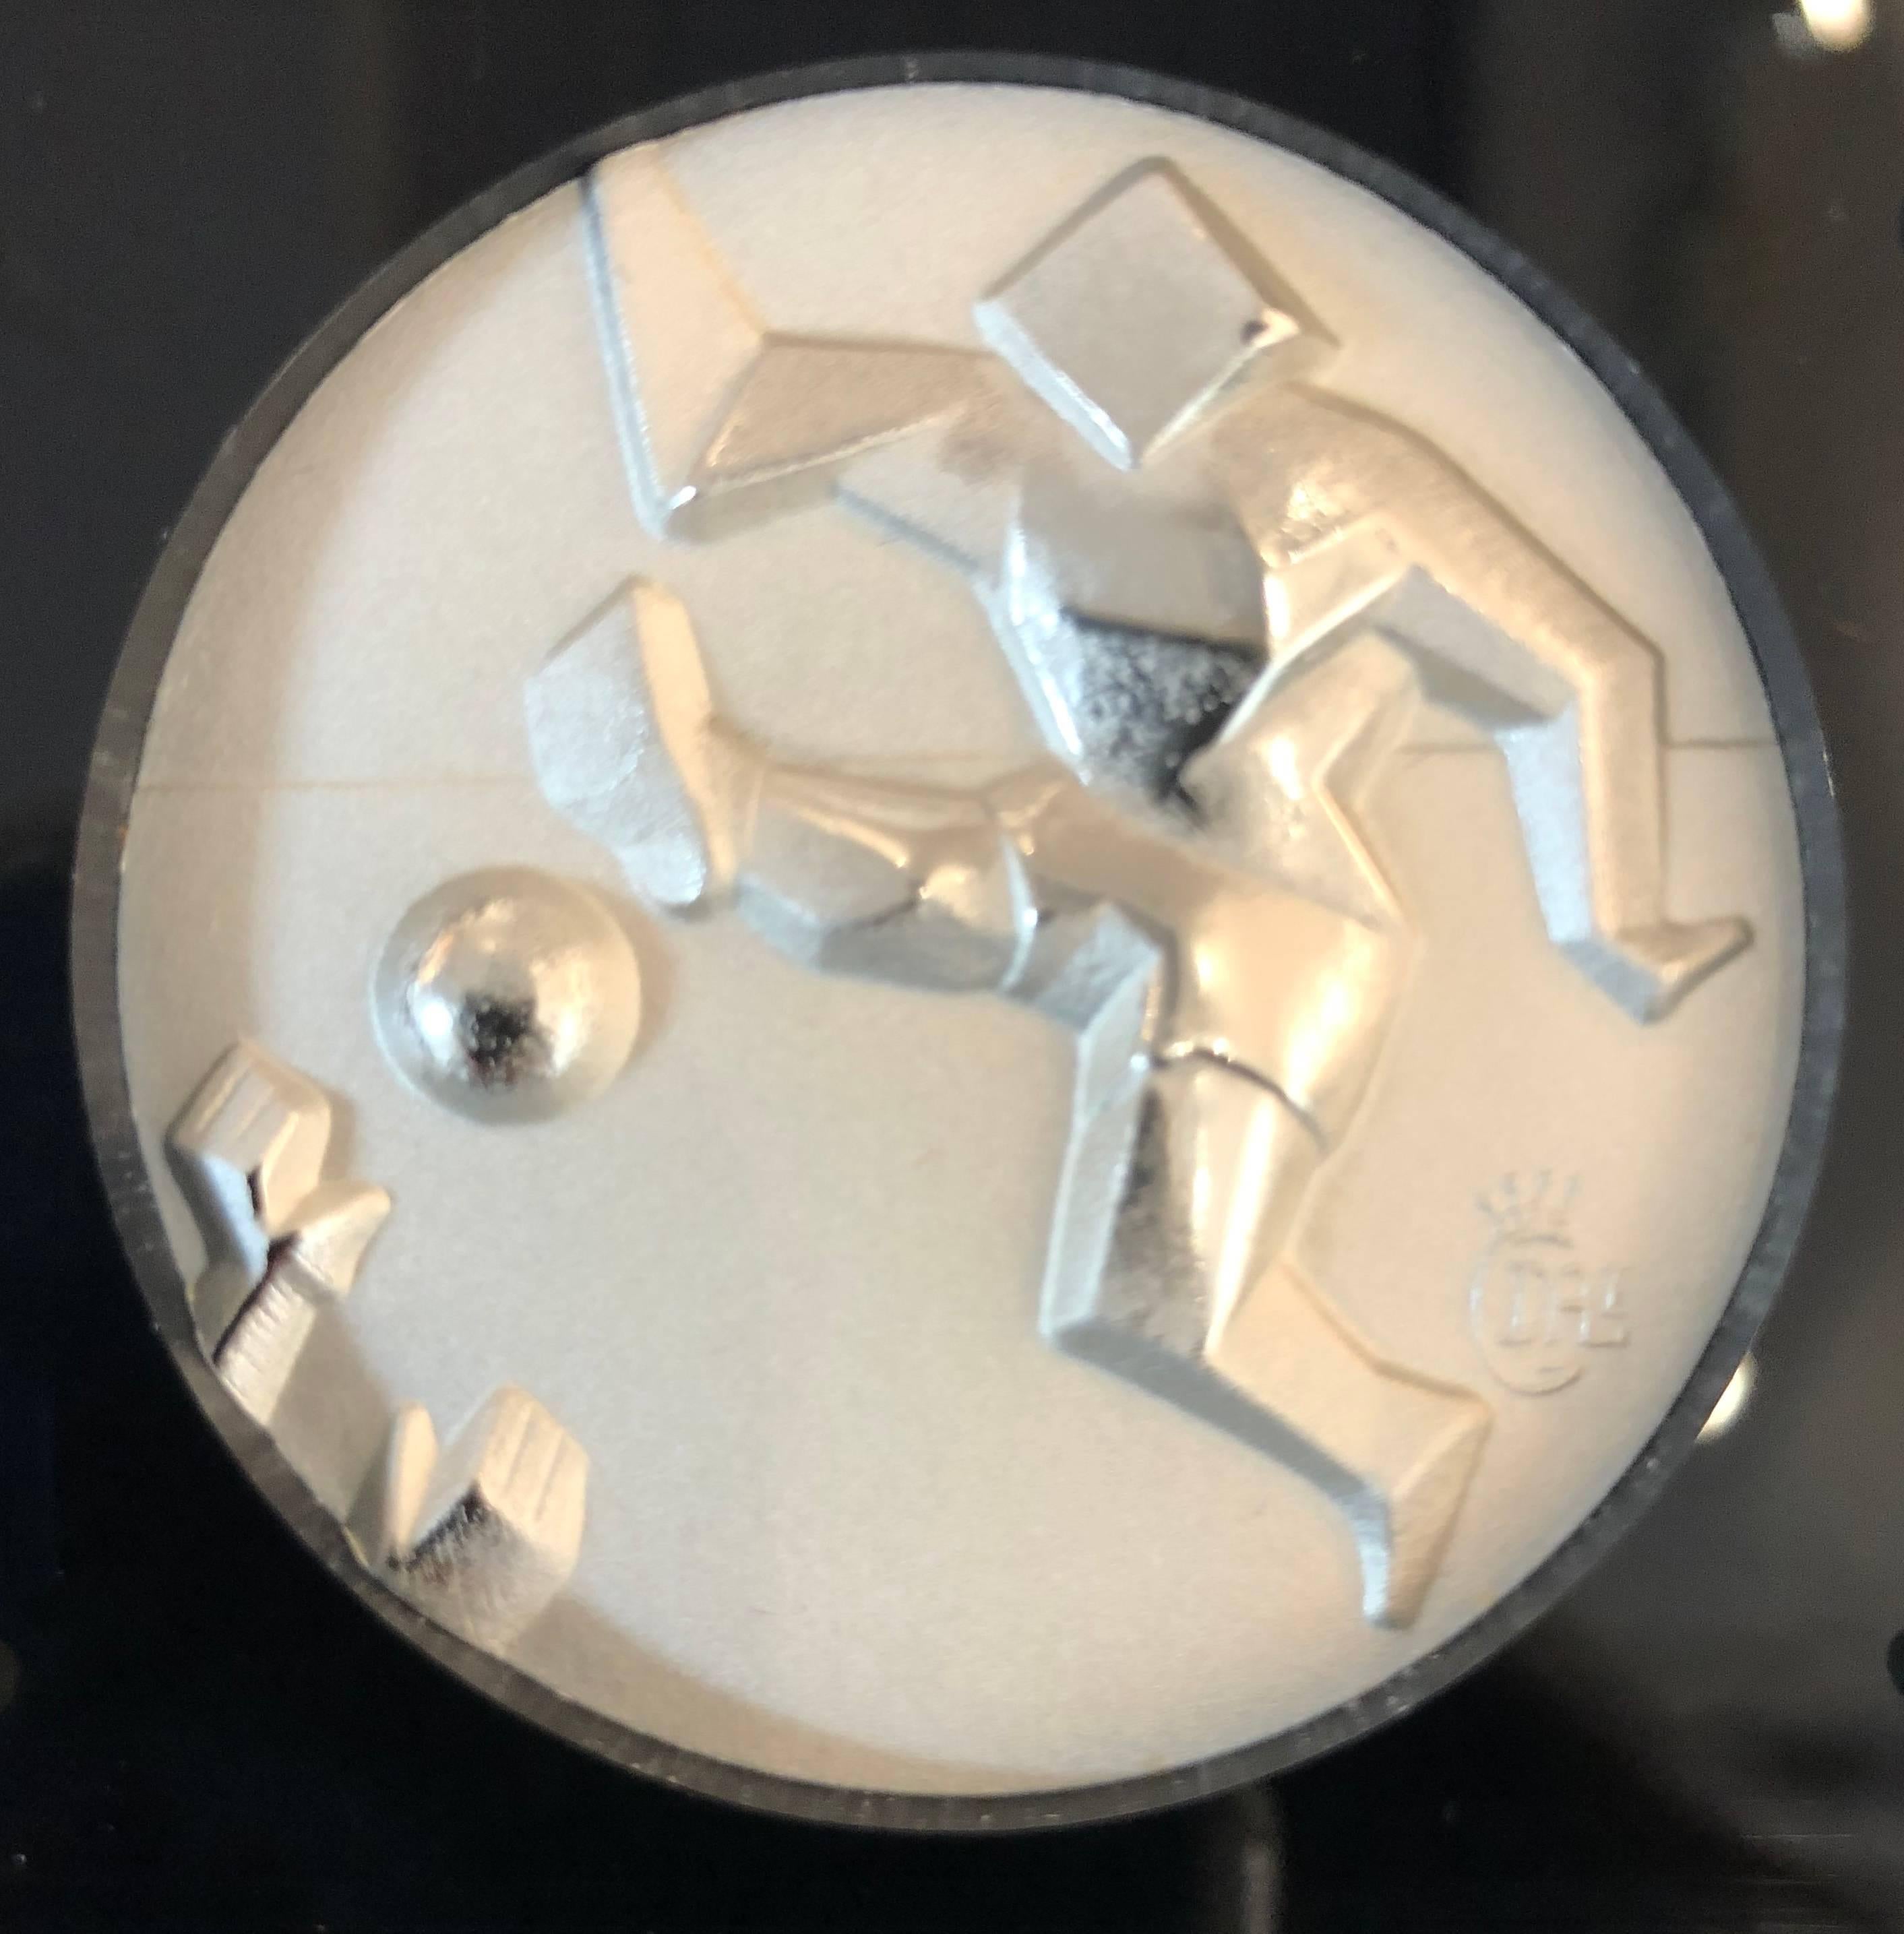 Complete Set of 1984 Olympic Medallions - Modern Art by Salvador Dalí